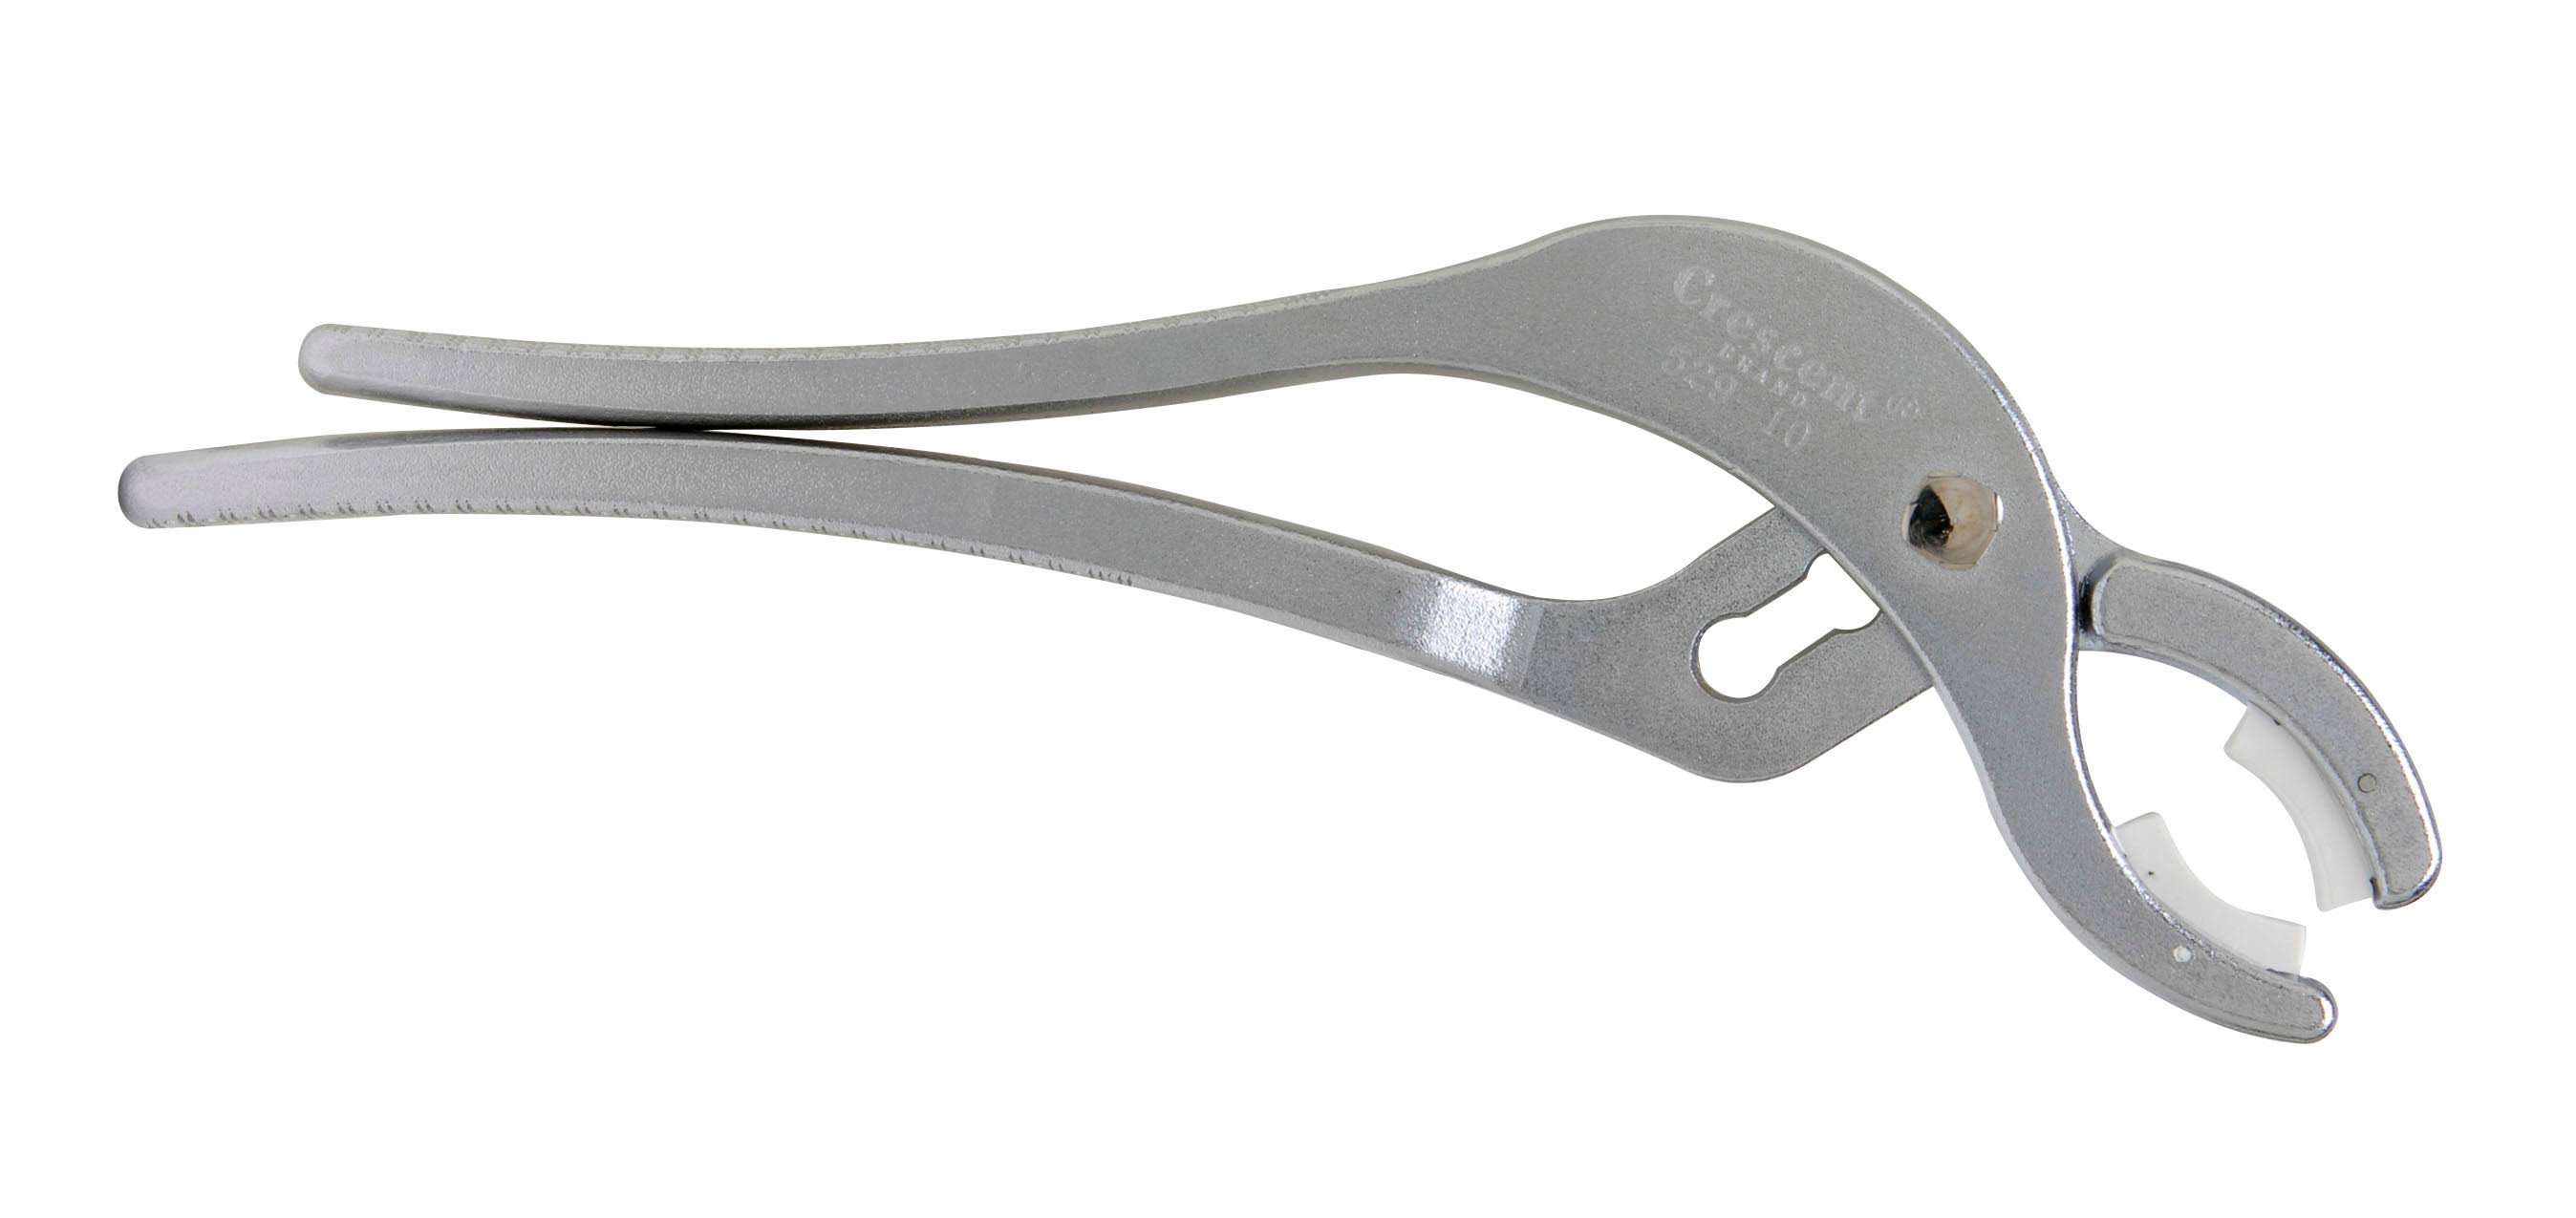 Crescent 52910N Tongue and Groove Plier - 10"